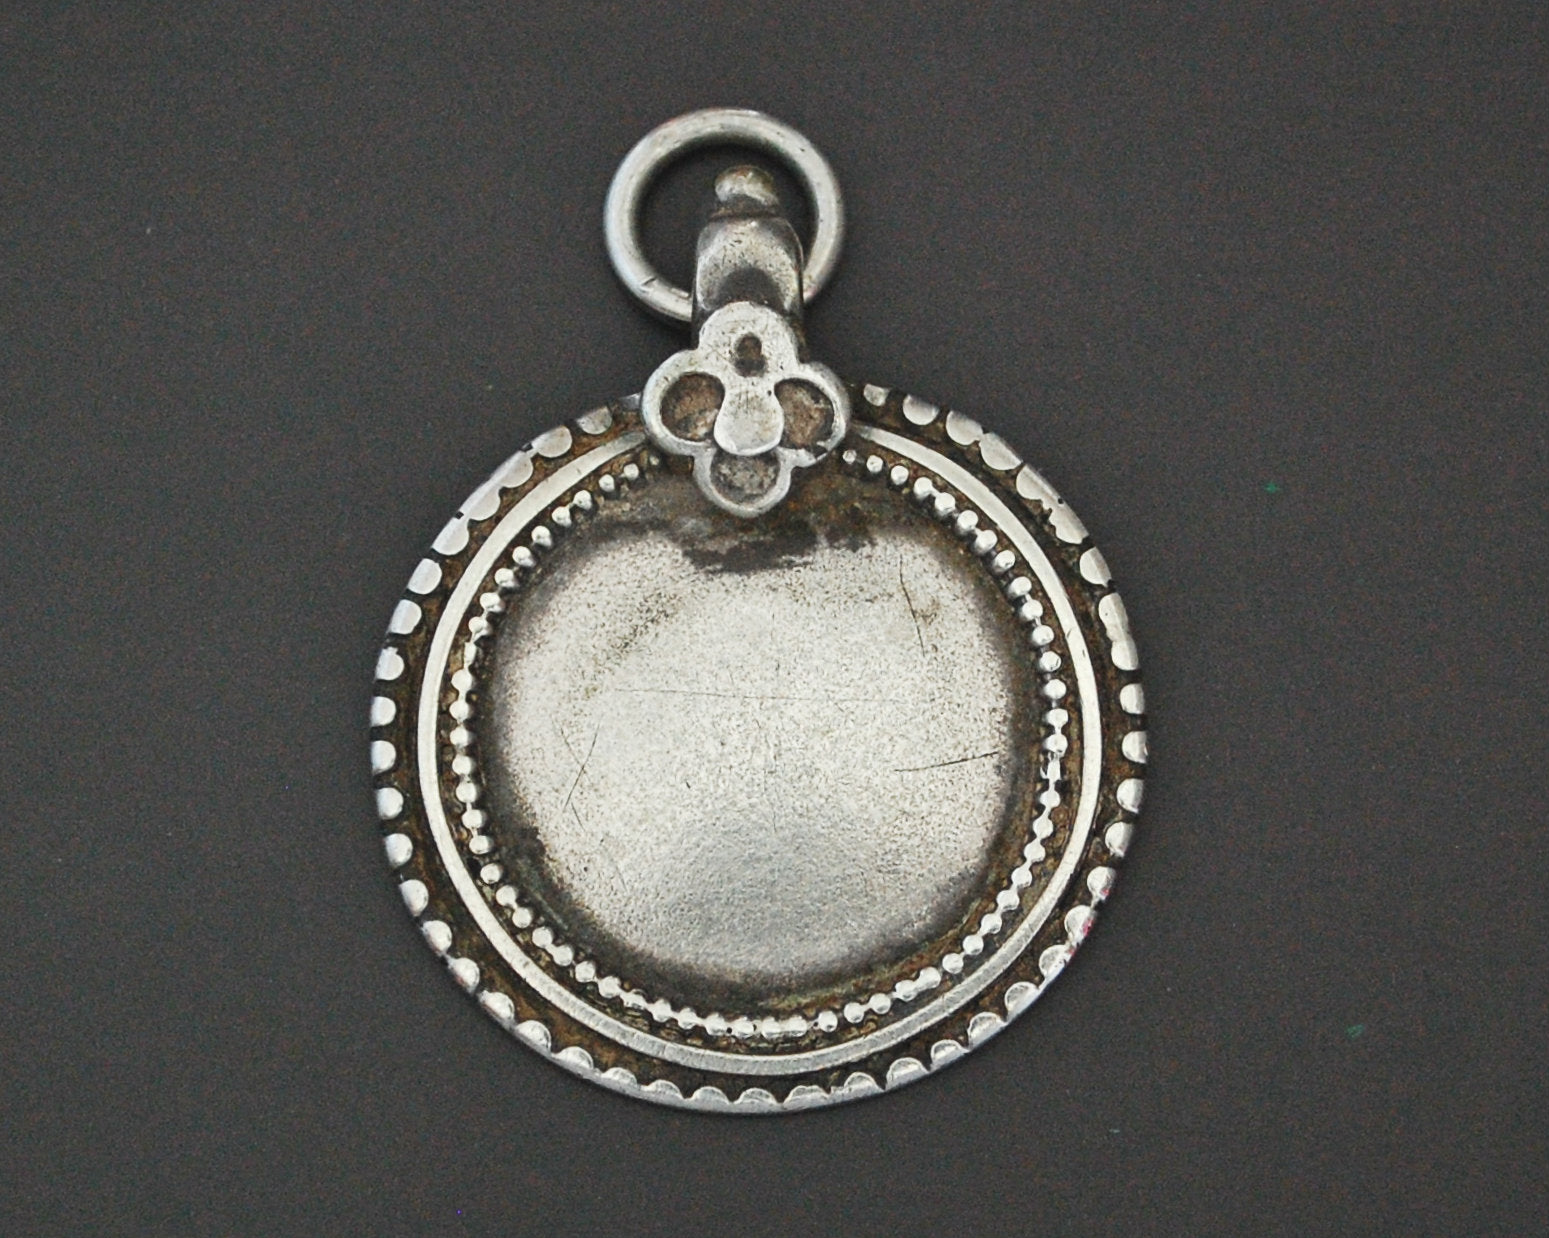 Indian Tribal Silver Disc Pendant with Flower on the Bale